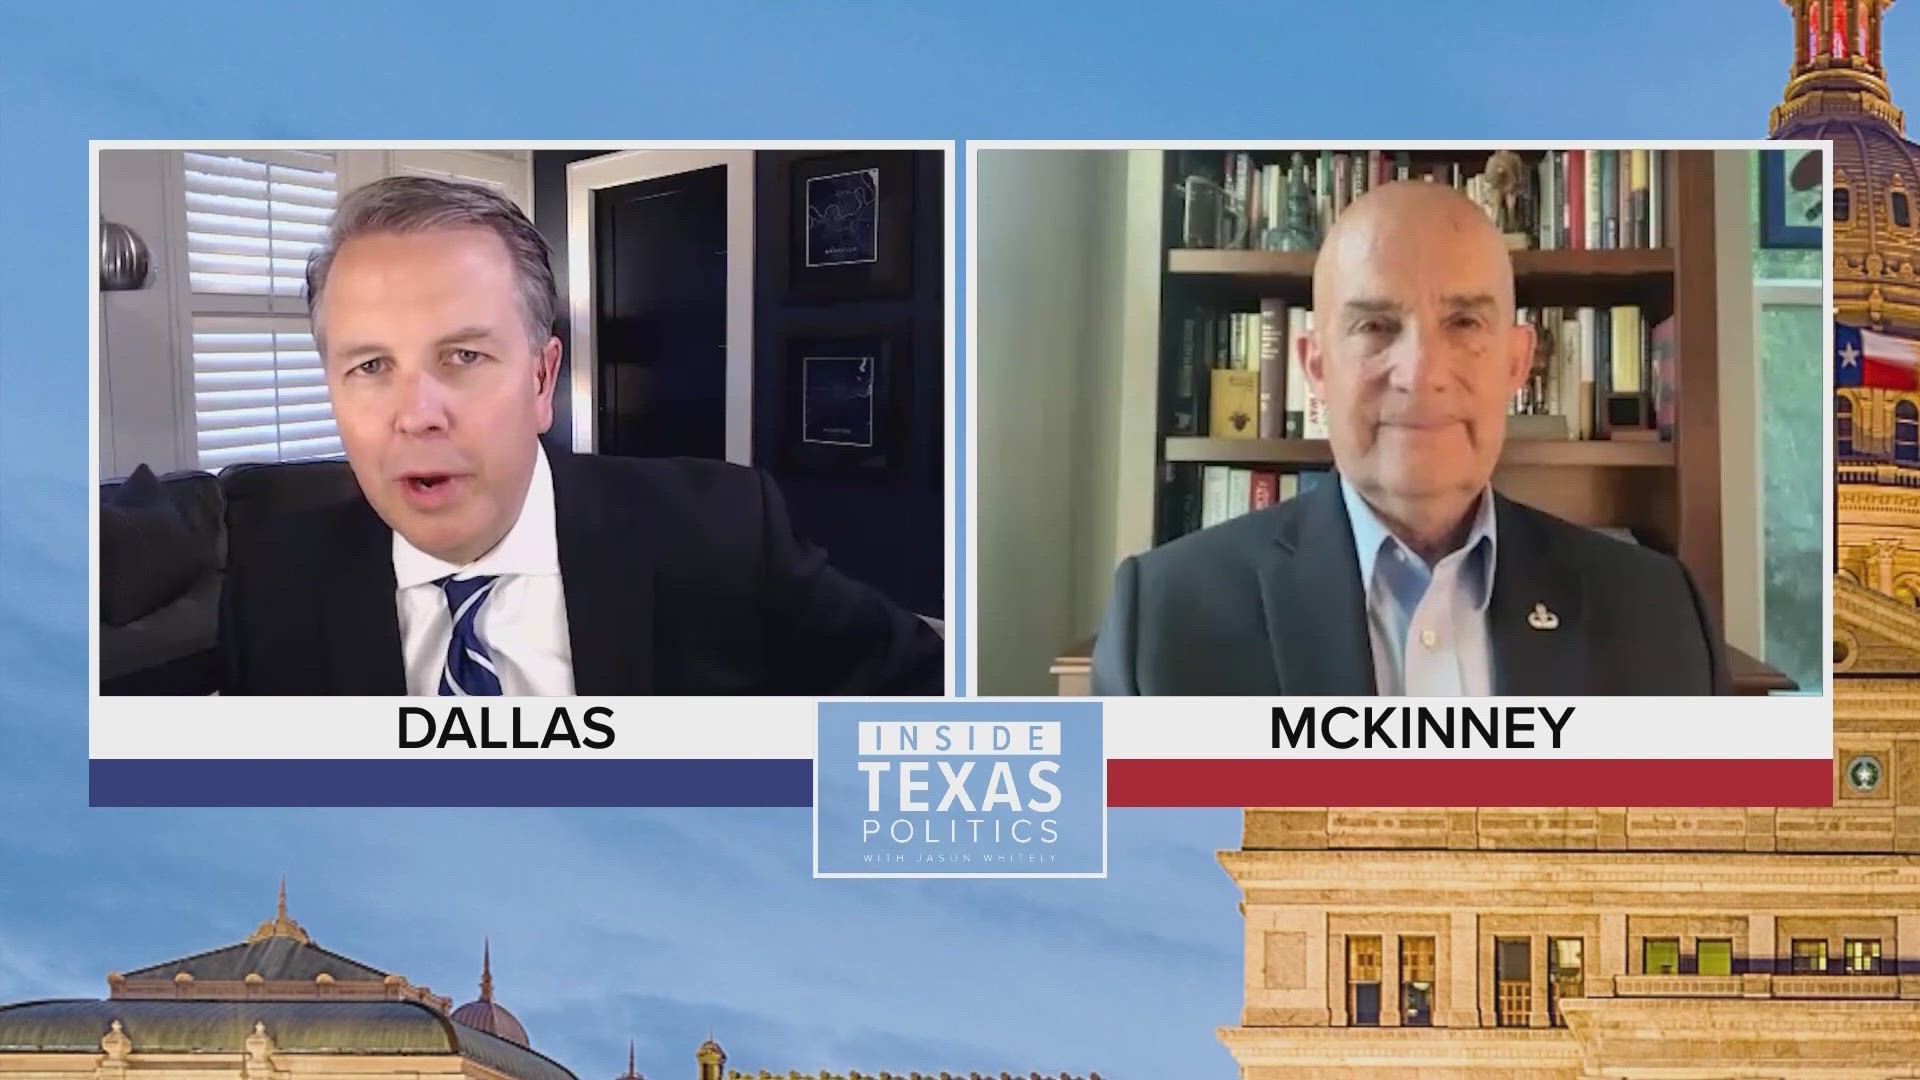 Texas Congressman Keith Self says sending American troops should at least be discussed.